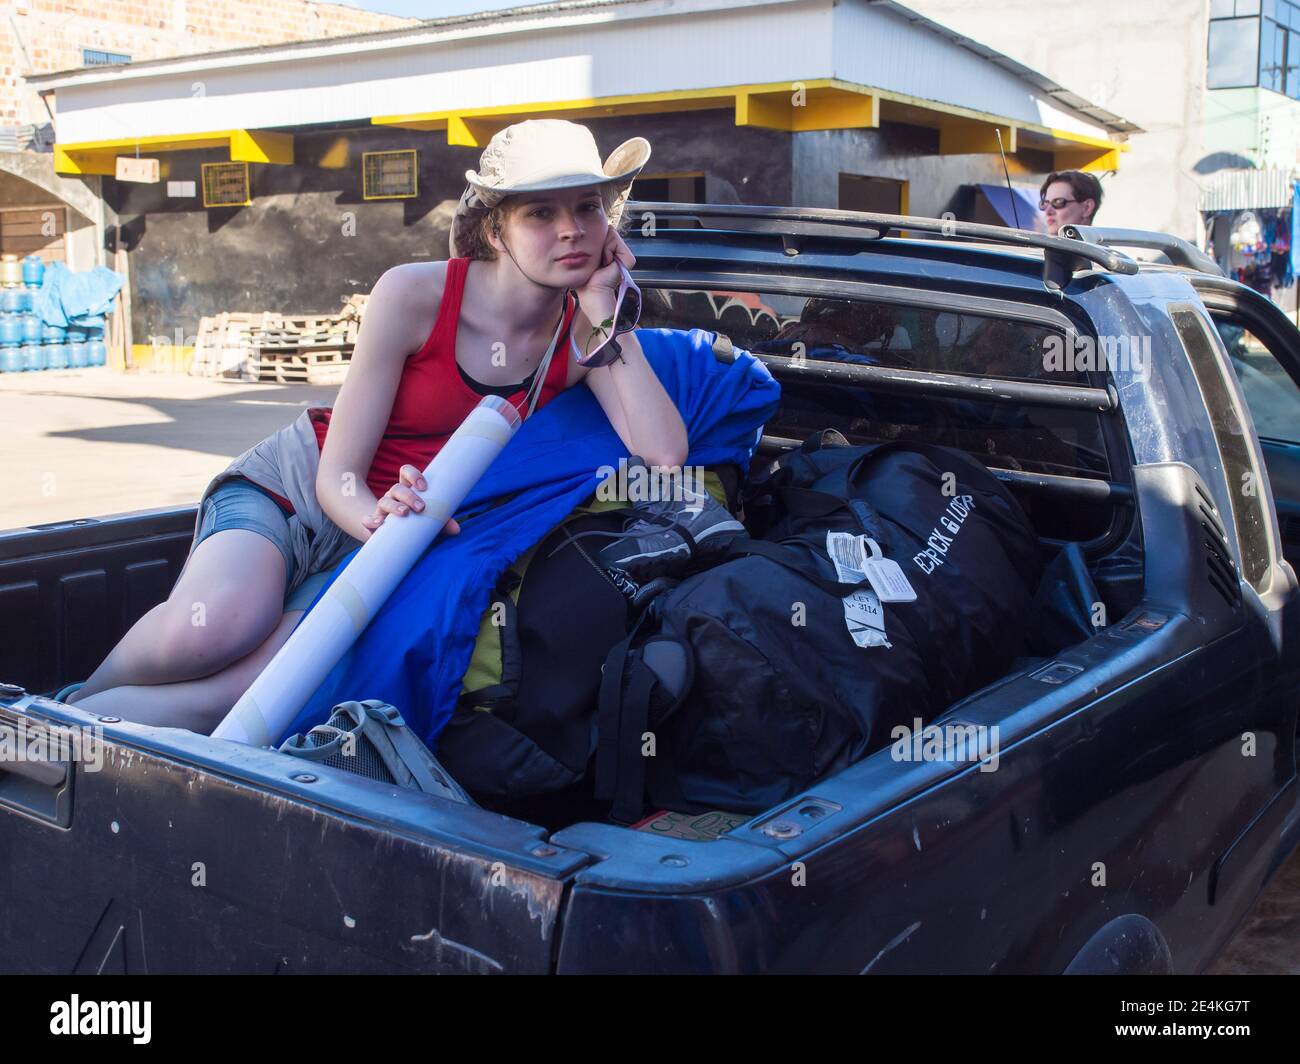 Benjamin Constant, Brazil - May 5, 2016: Backpacker travels on a car crate along the roads of the rainforest, Amazonia. Latin America Stock Photo